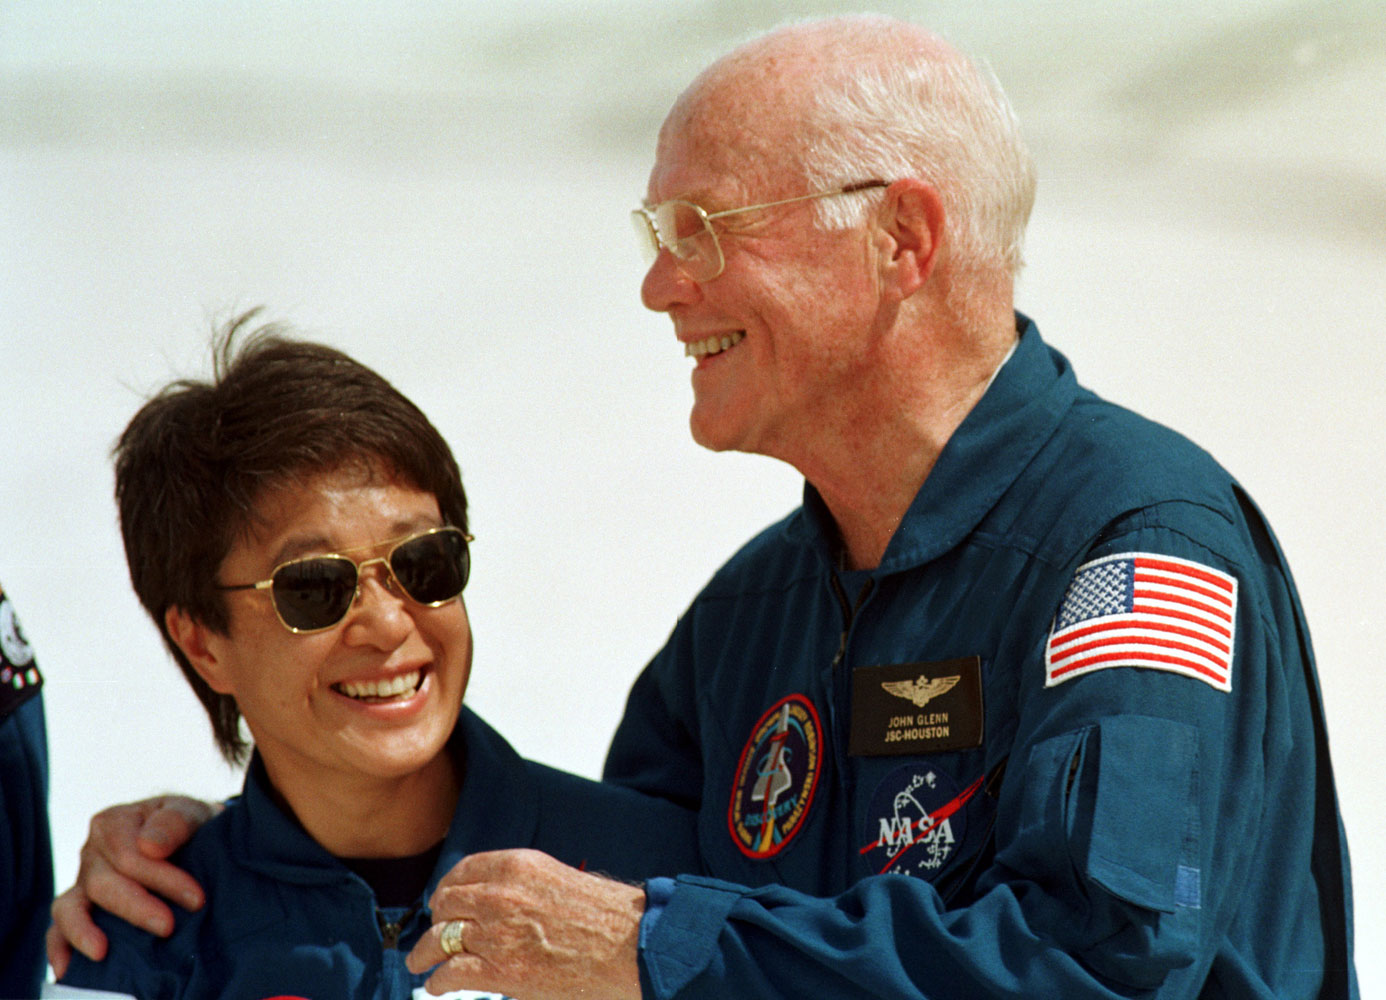 Japanese astronaut Chiaki Mukai and John Glenn at a press conference, on Oct. 8, 1998. Mukai was Japan's first woman in space.